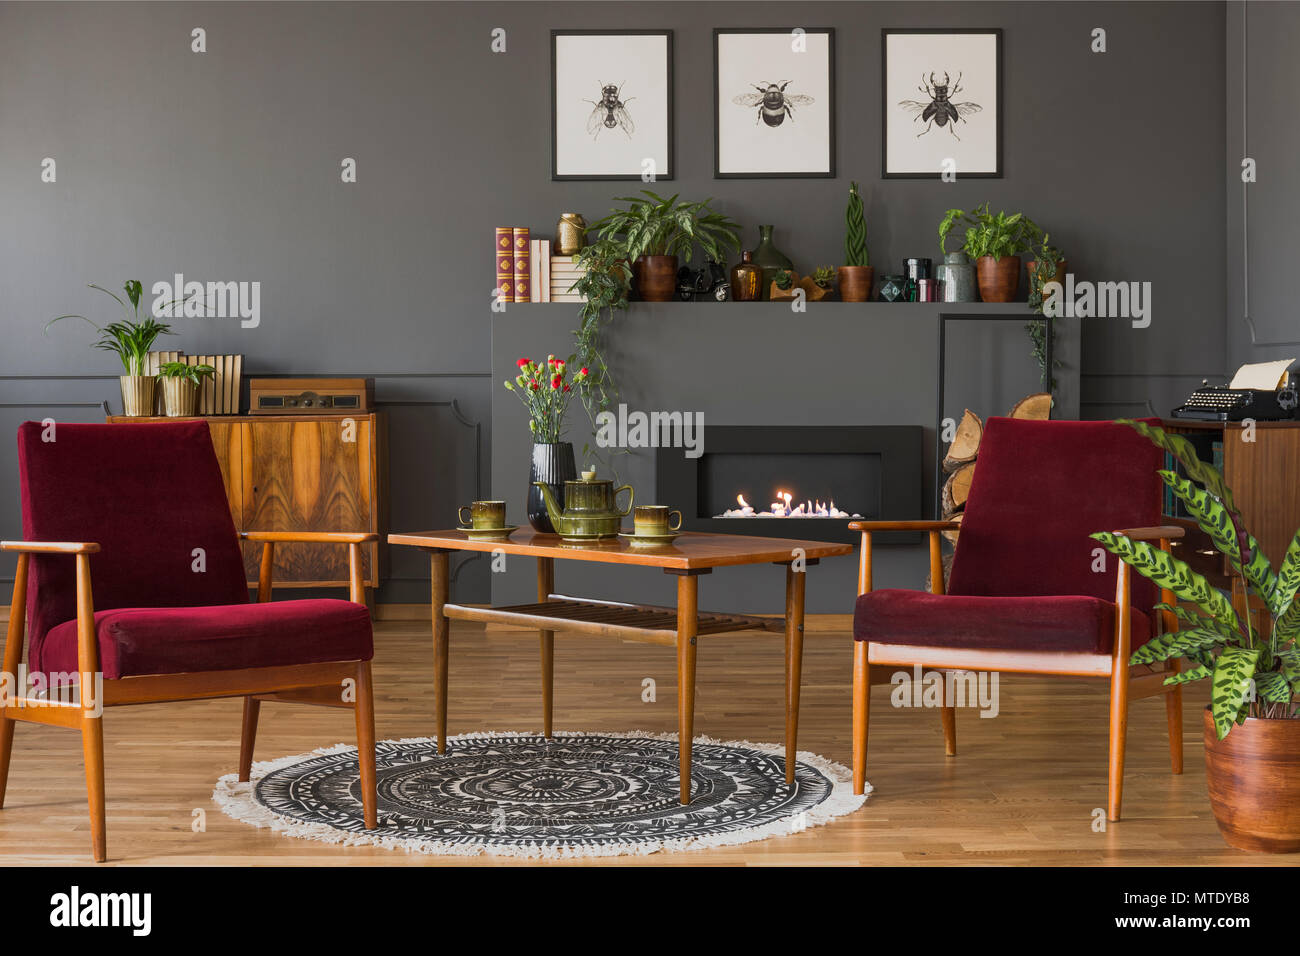 Dark red wooden armchairs in vintage flat interior with posters on grey wall above fireplace. Real photo Stock Photo